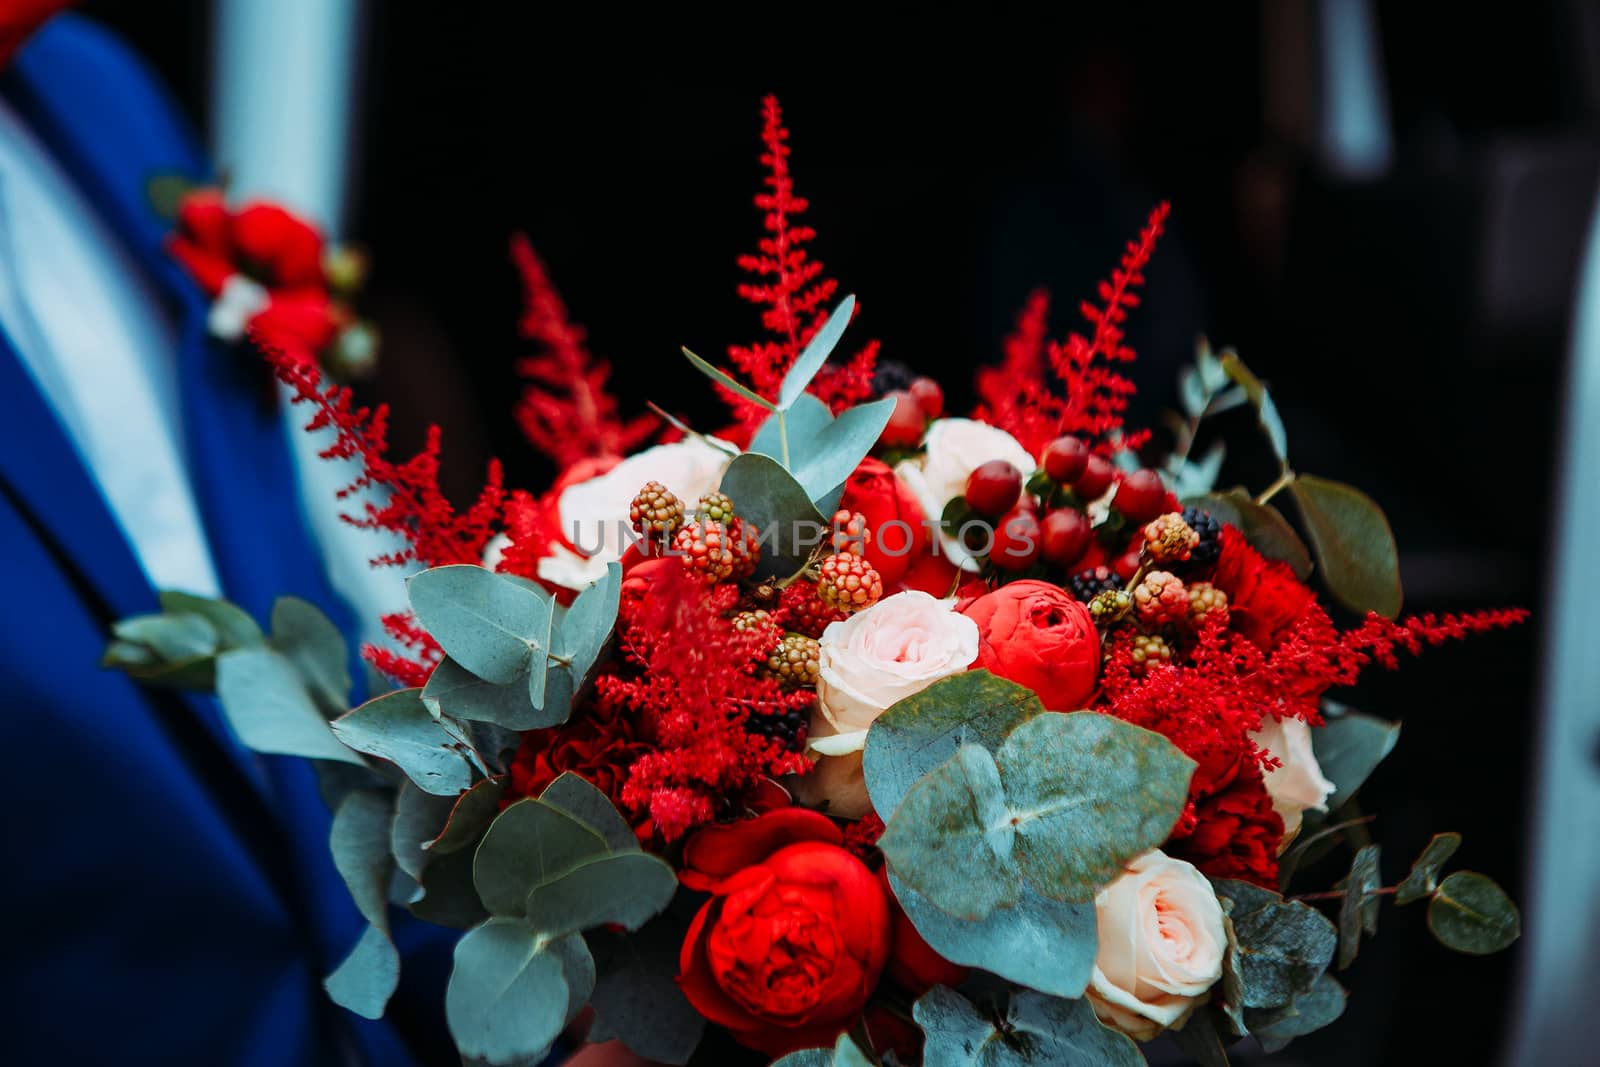 Wedding bouquet in the hands of the groom
 by Opikanets